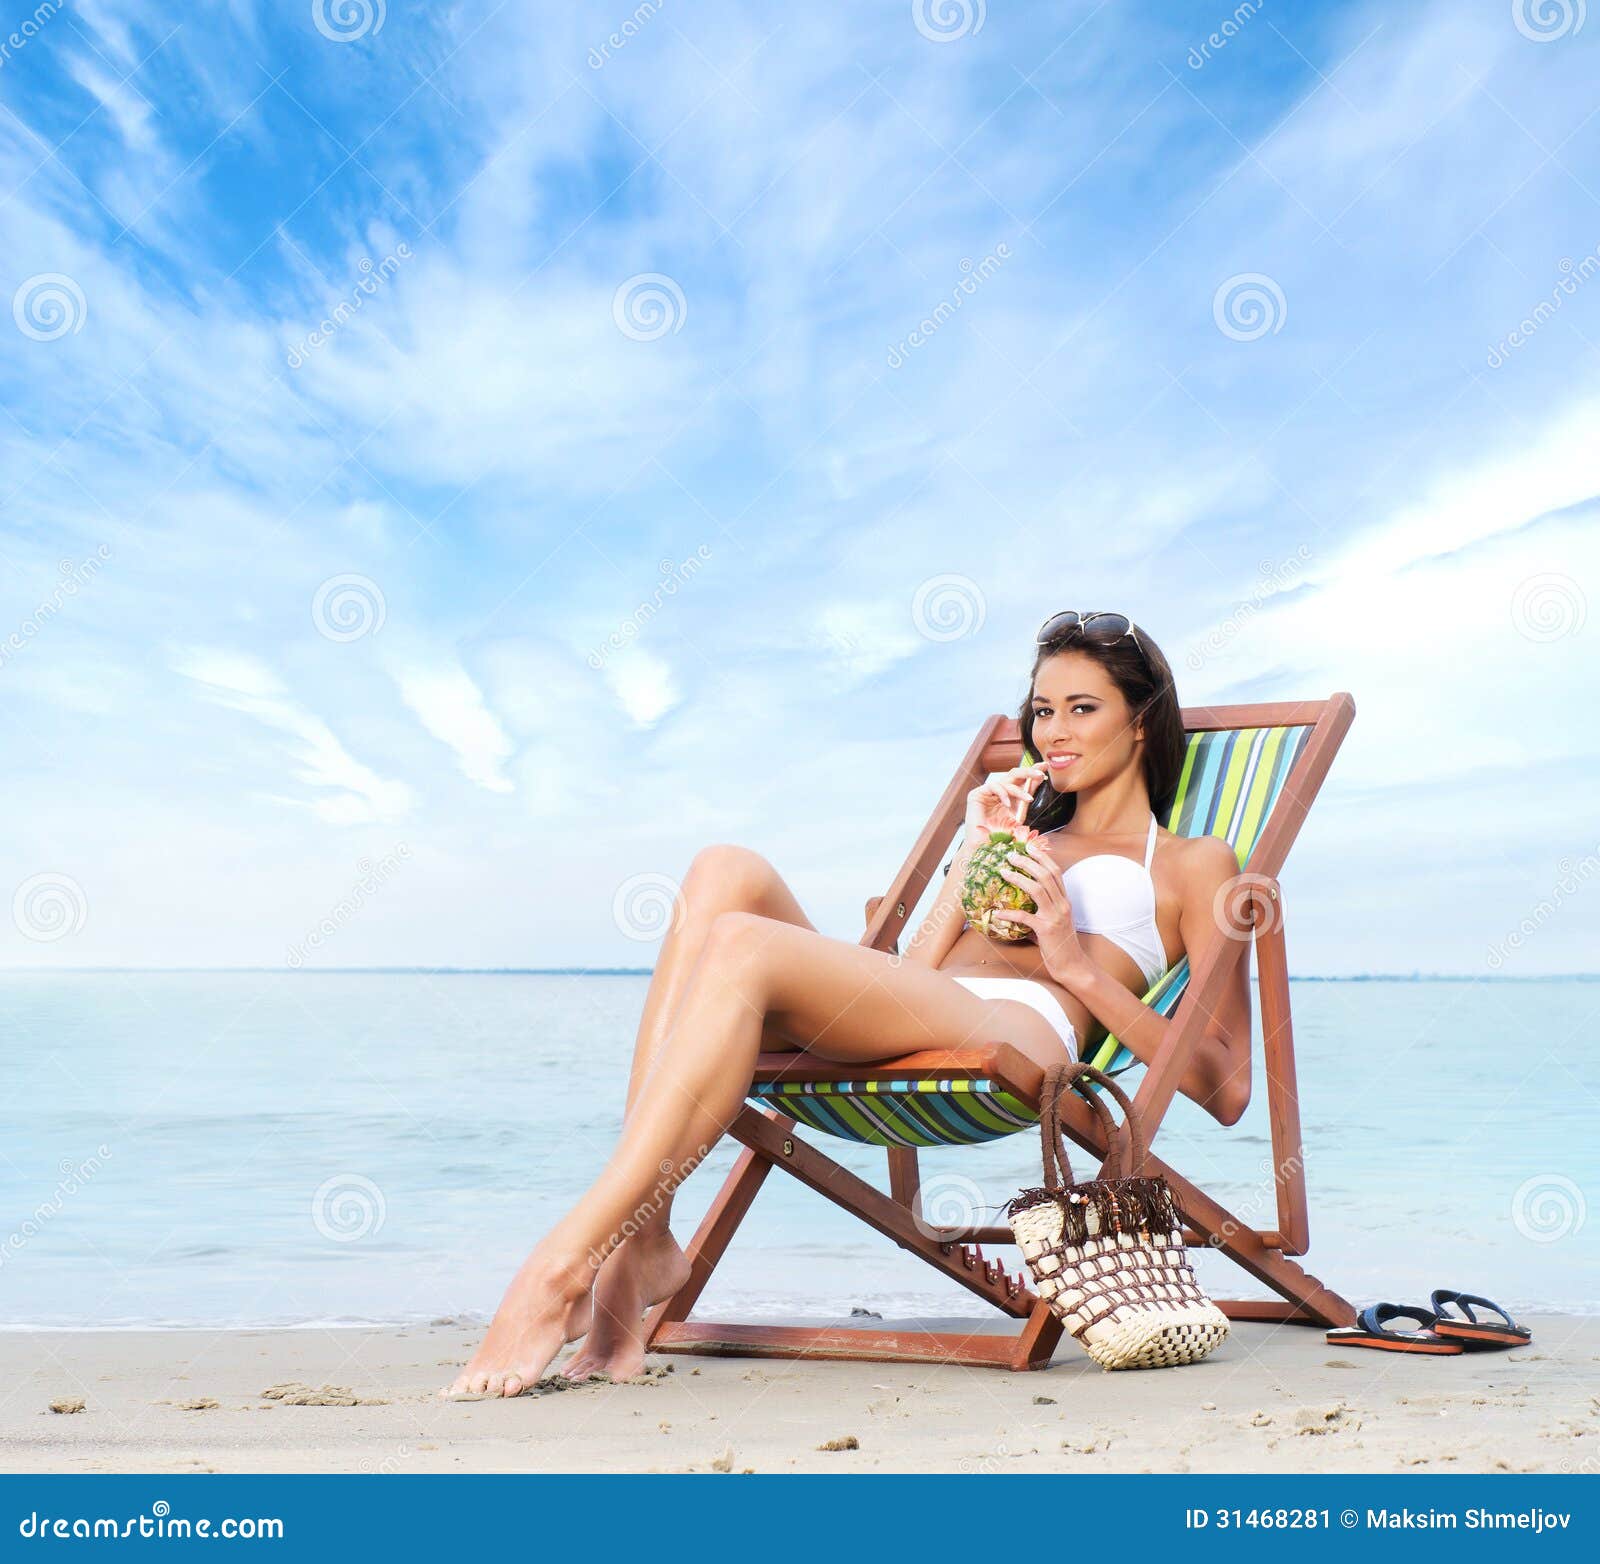 A Young Brunette Woman Drinking a Cocktail and Relaxing on the Beach Stock Image picture